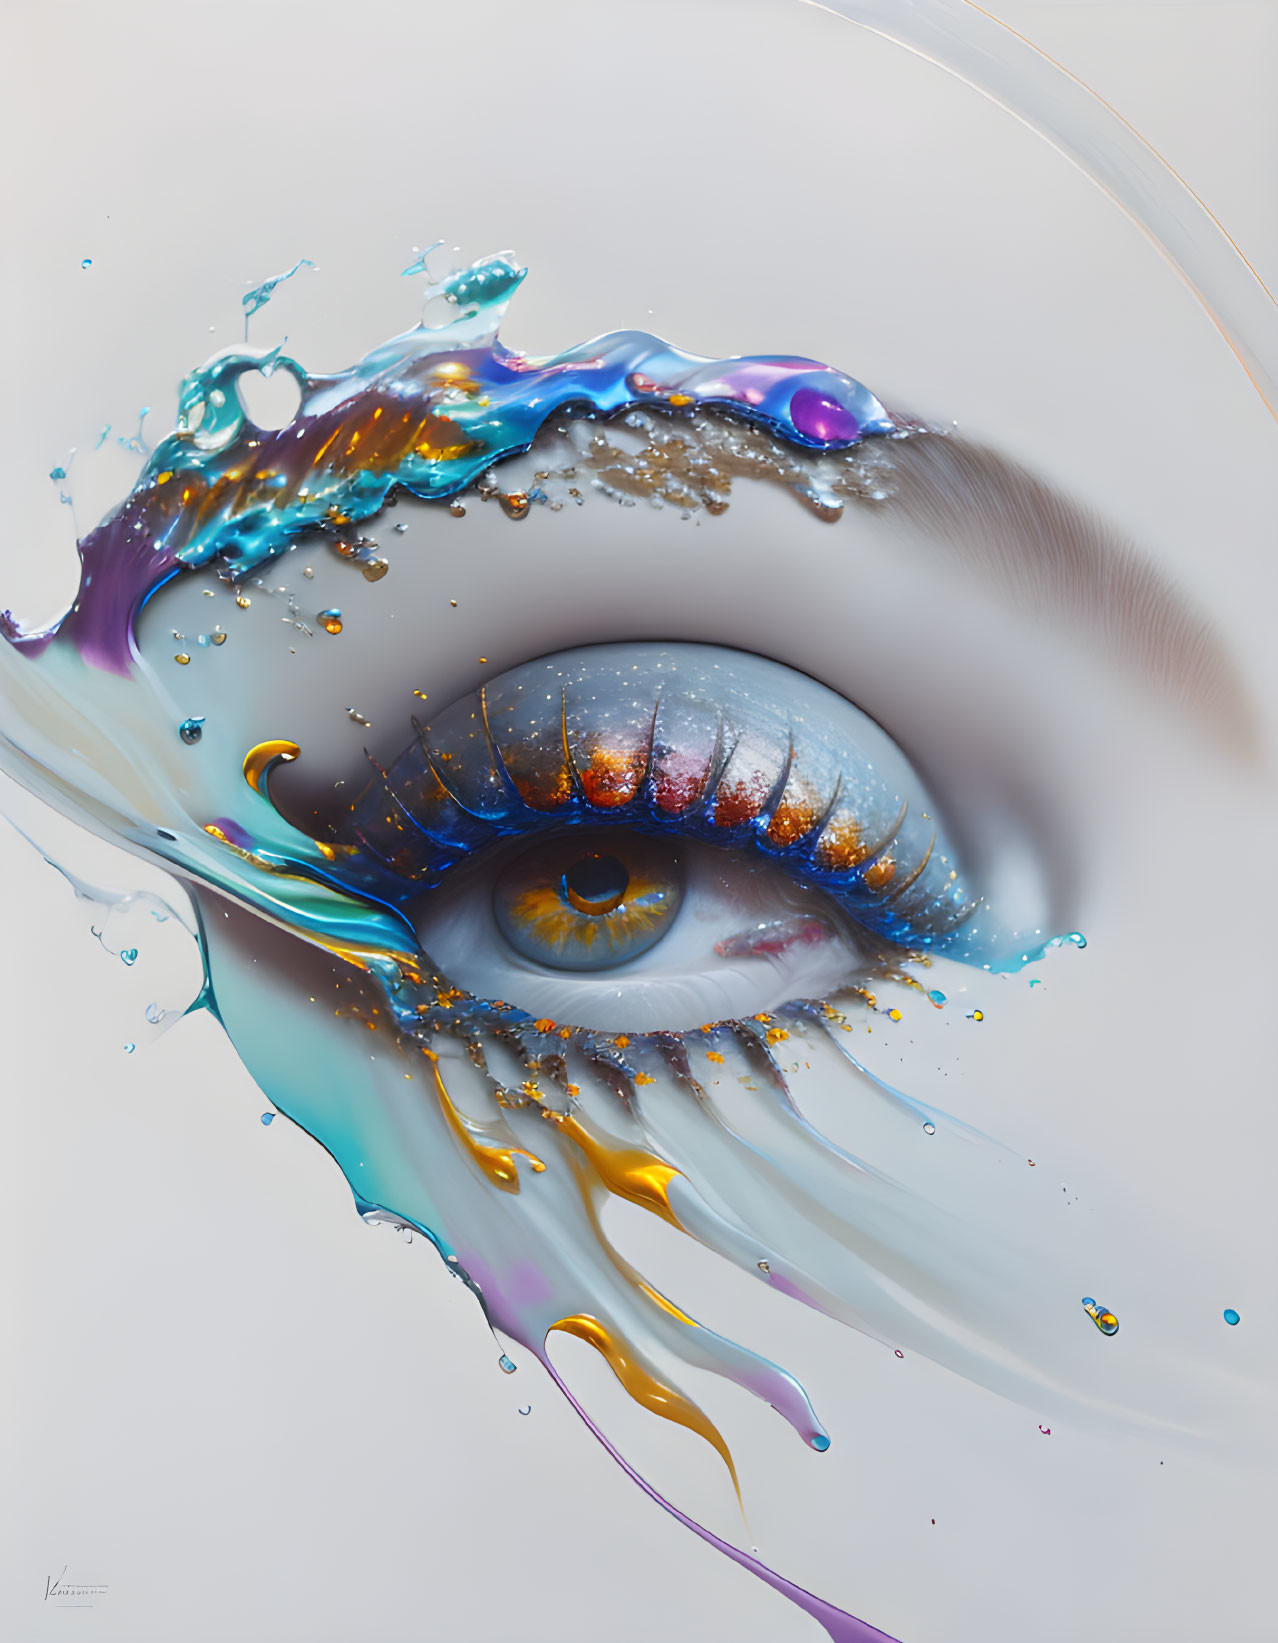 Detailed colorful painting of human eye with blue, orange, and purple splashes